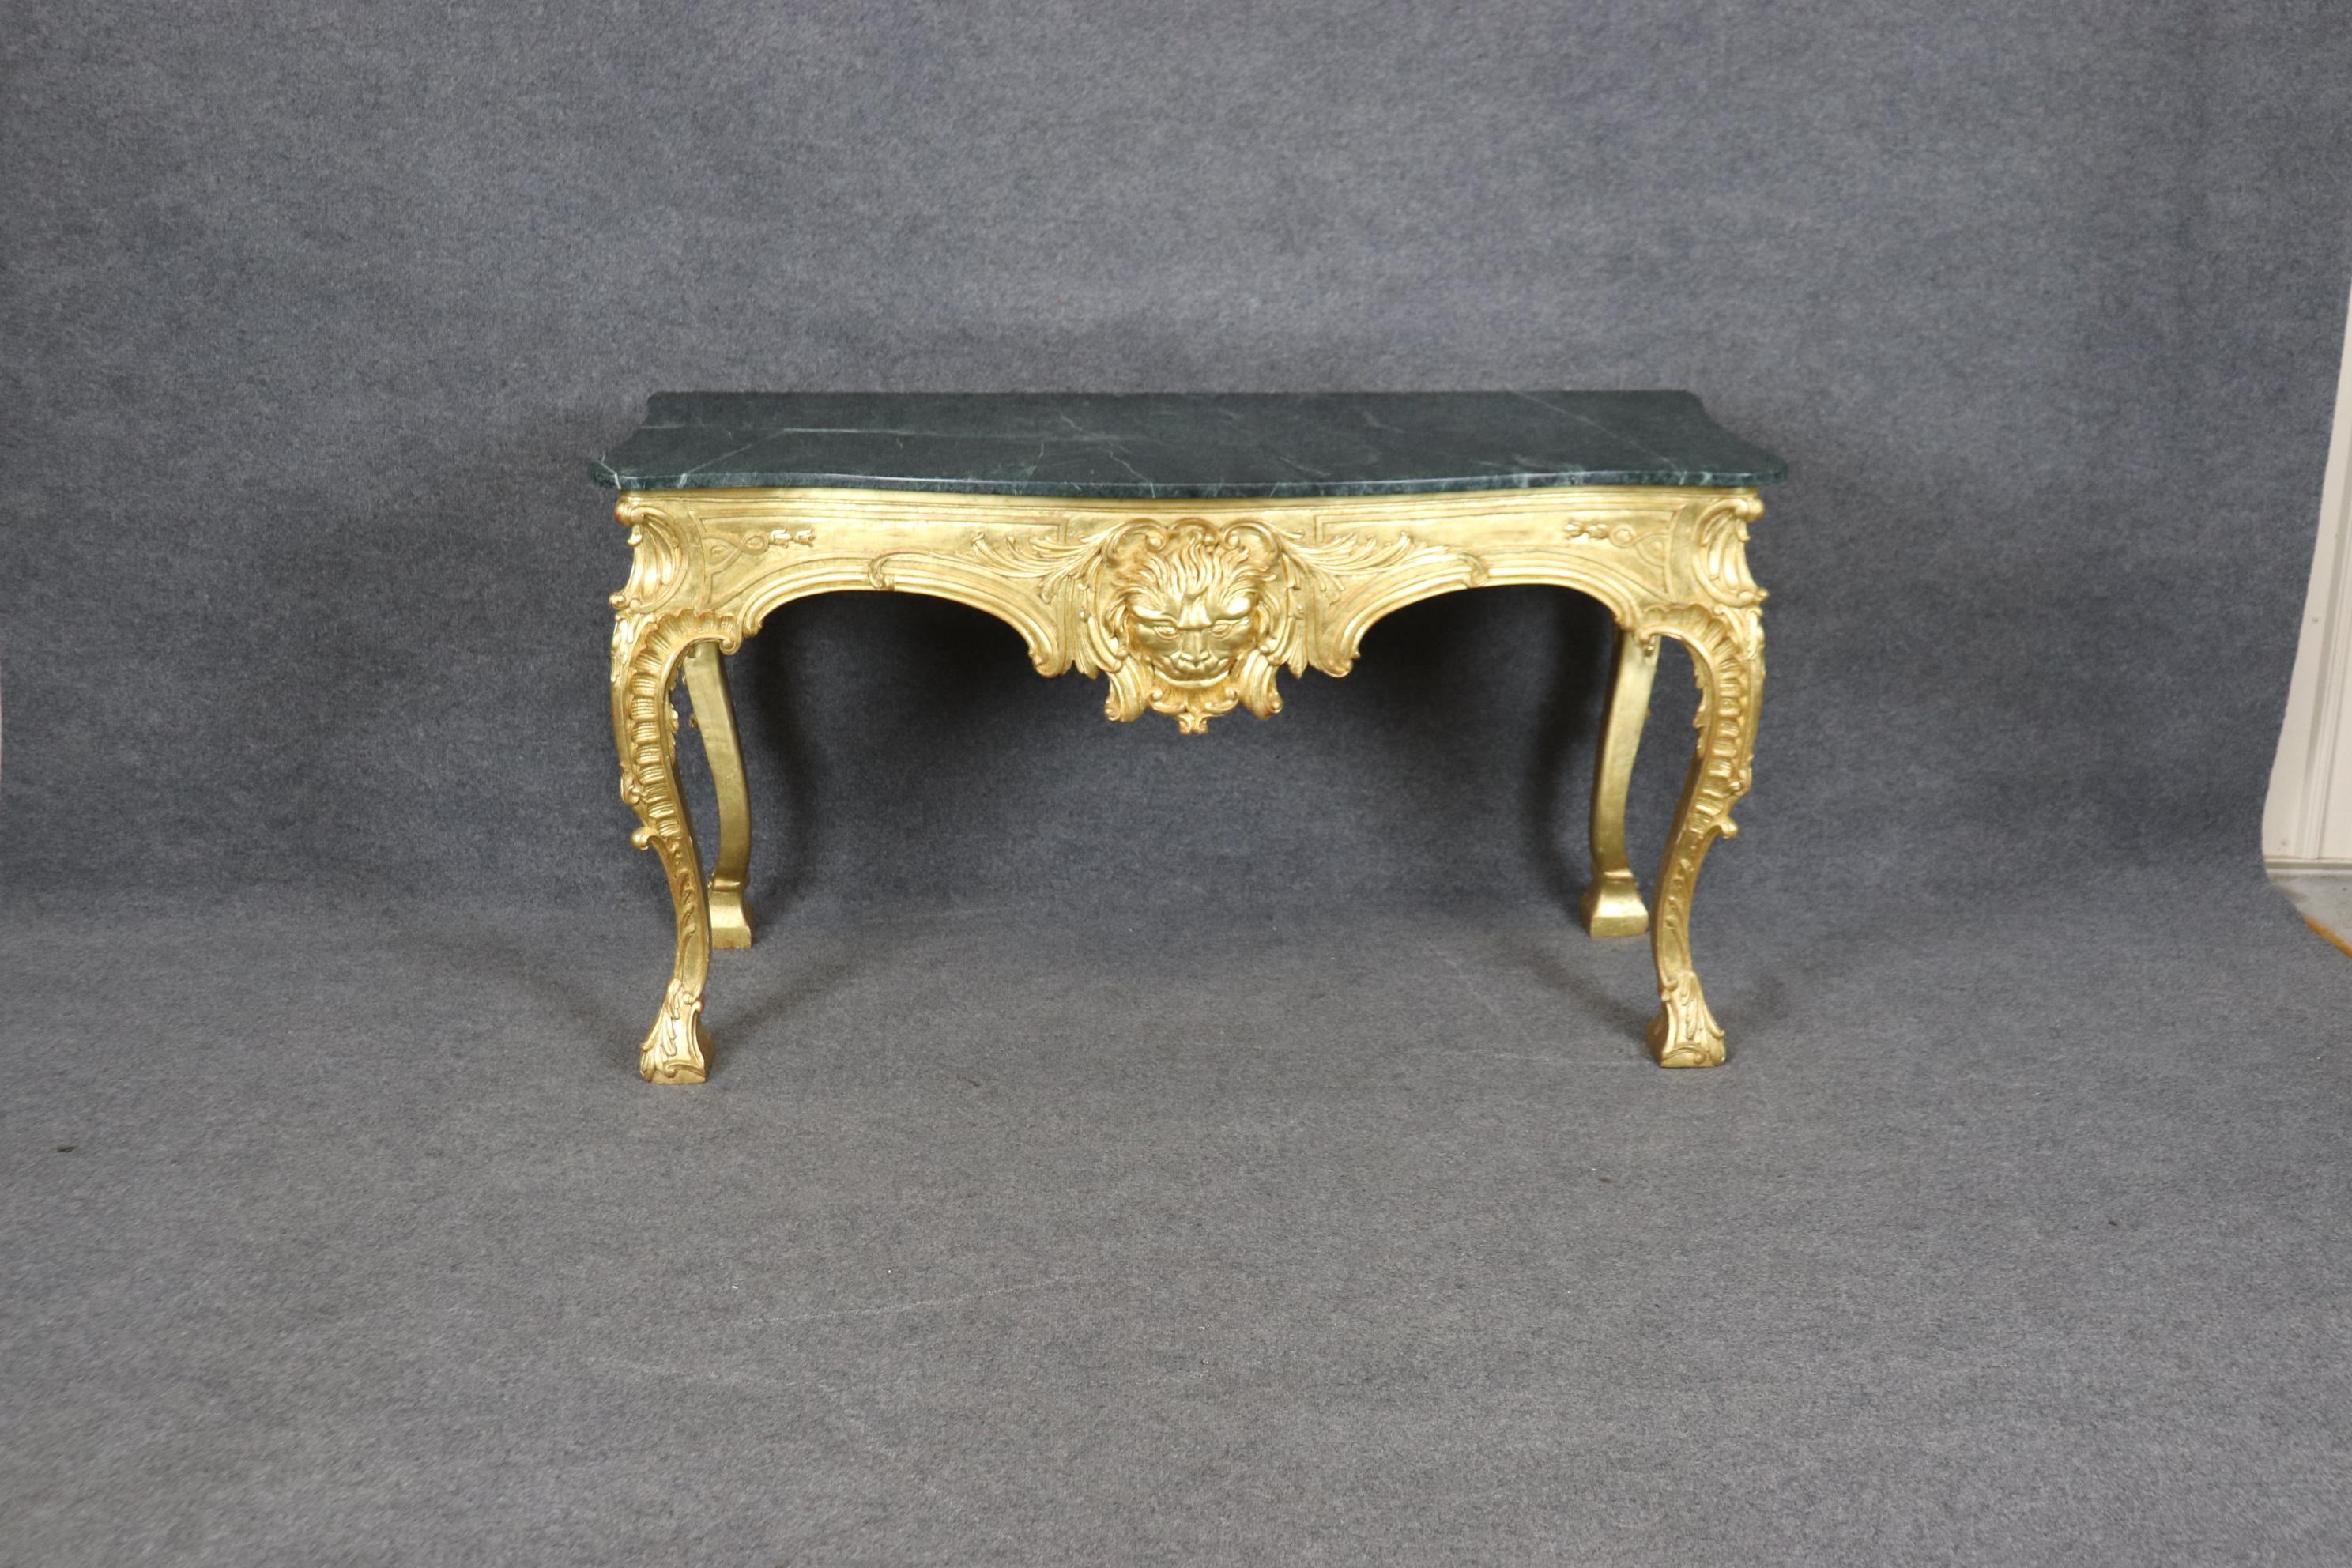 This is a spectacular custom-made and hand gilded 18kt genuine gold leaf over Italian red bole clay ground. The former owner has this table made in England and was in fact England and paid dearly for the size and quality to make it. The table is in